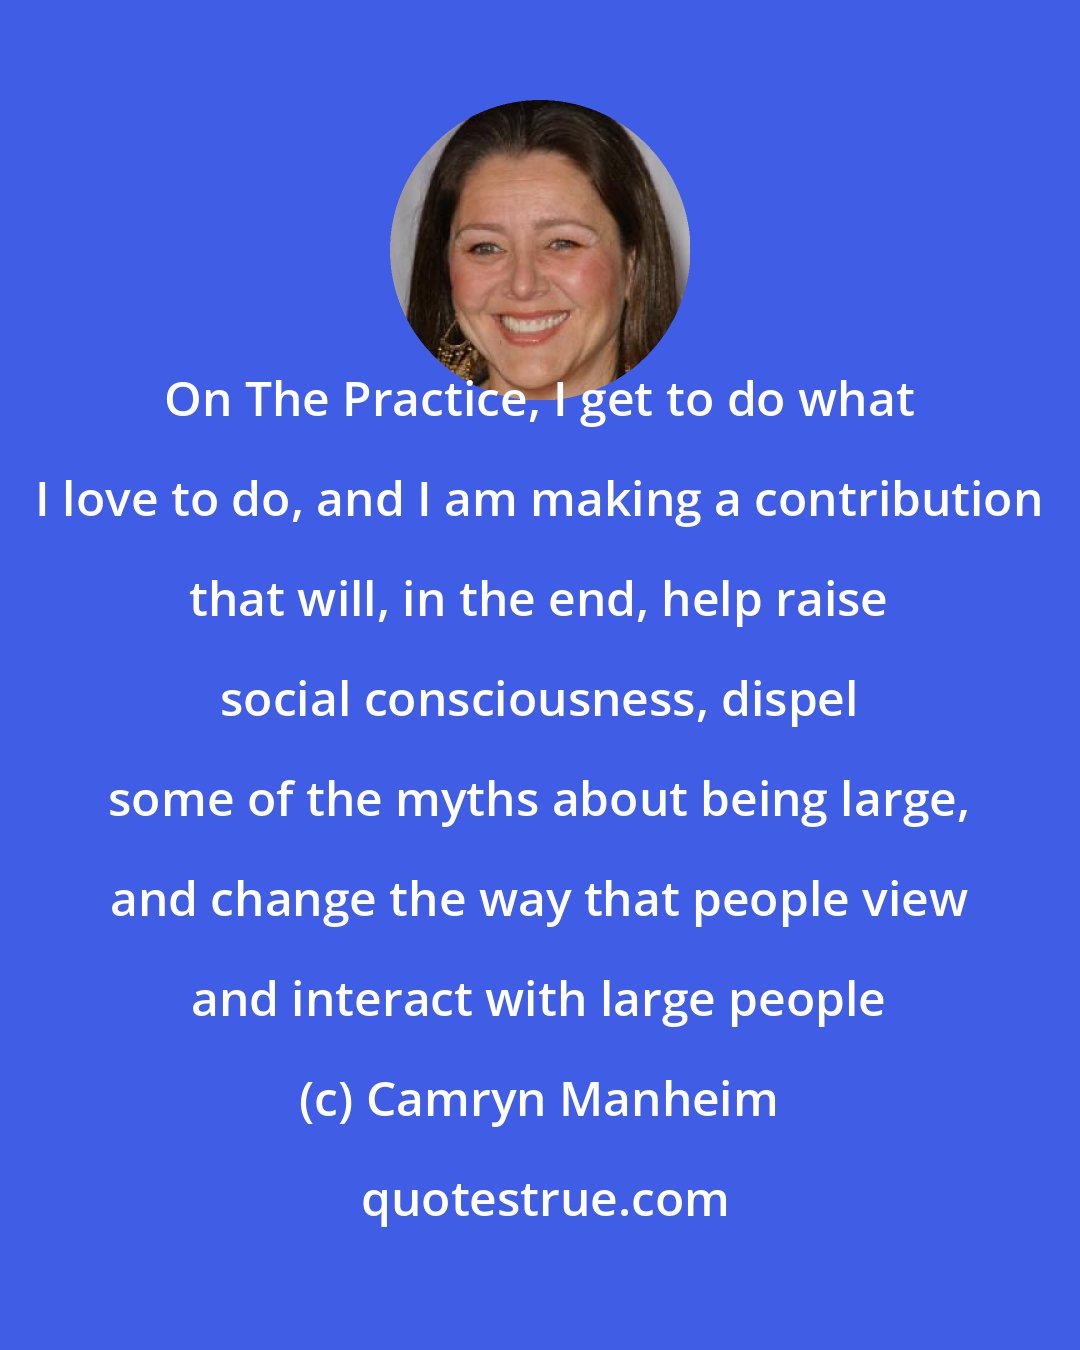 Camryn Manheim: On The Practice, I get to do what I love to do, and I am making a contribution that will, in the end, help raise social consciousness, dispel some of the myths about being large, and change the way that people view and interact with large people